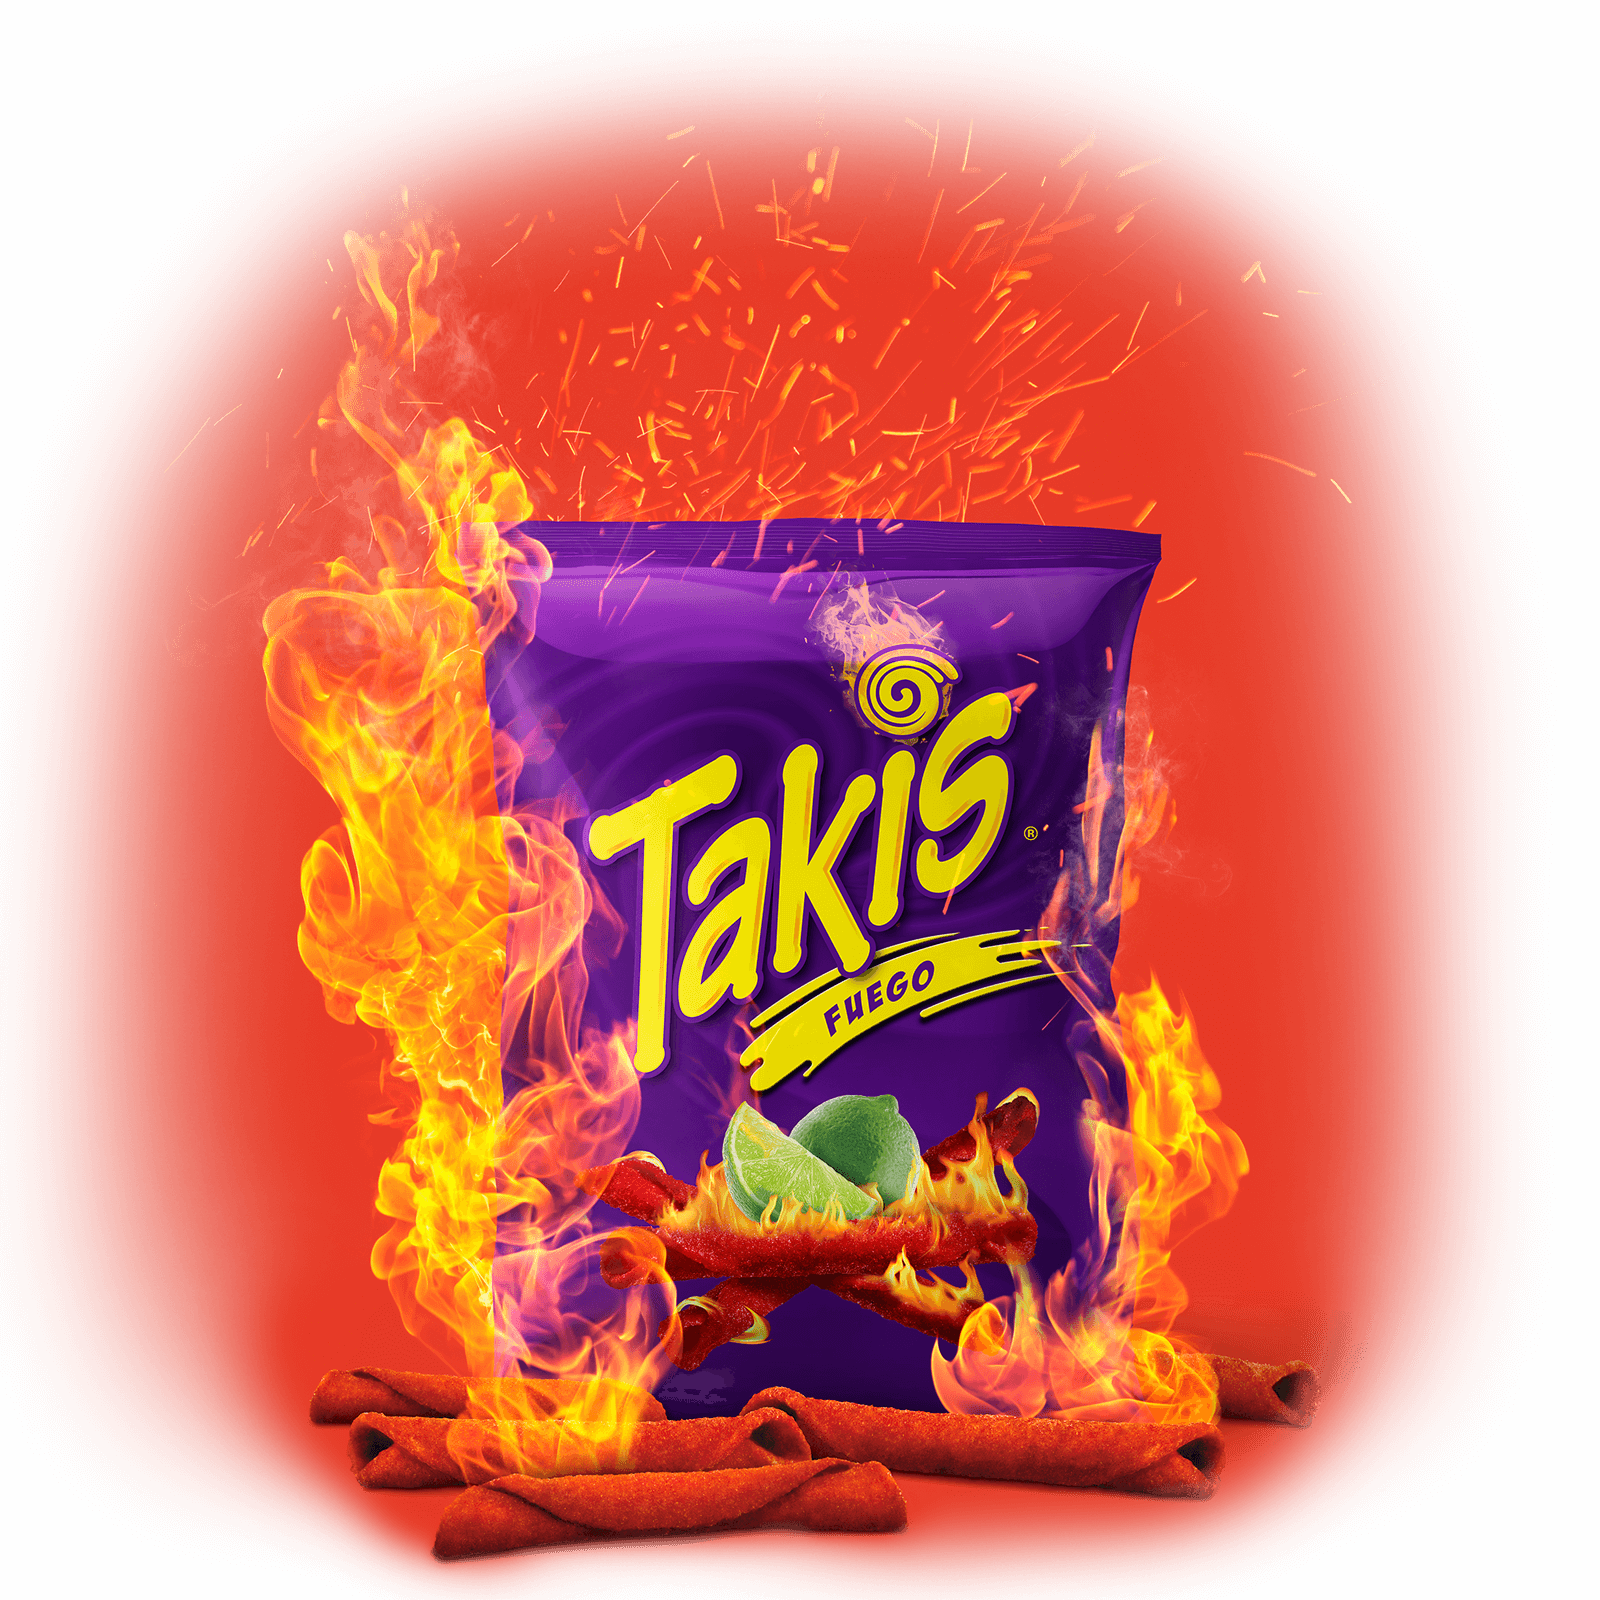 Takis Fuego Flaming Snack Promotion